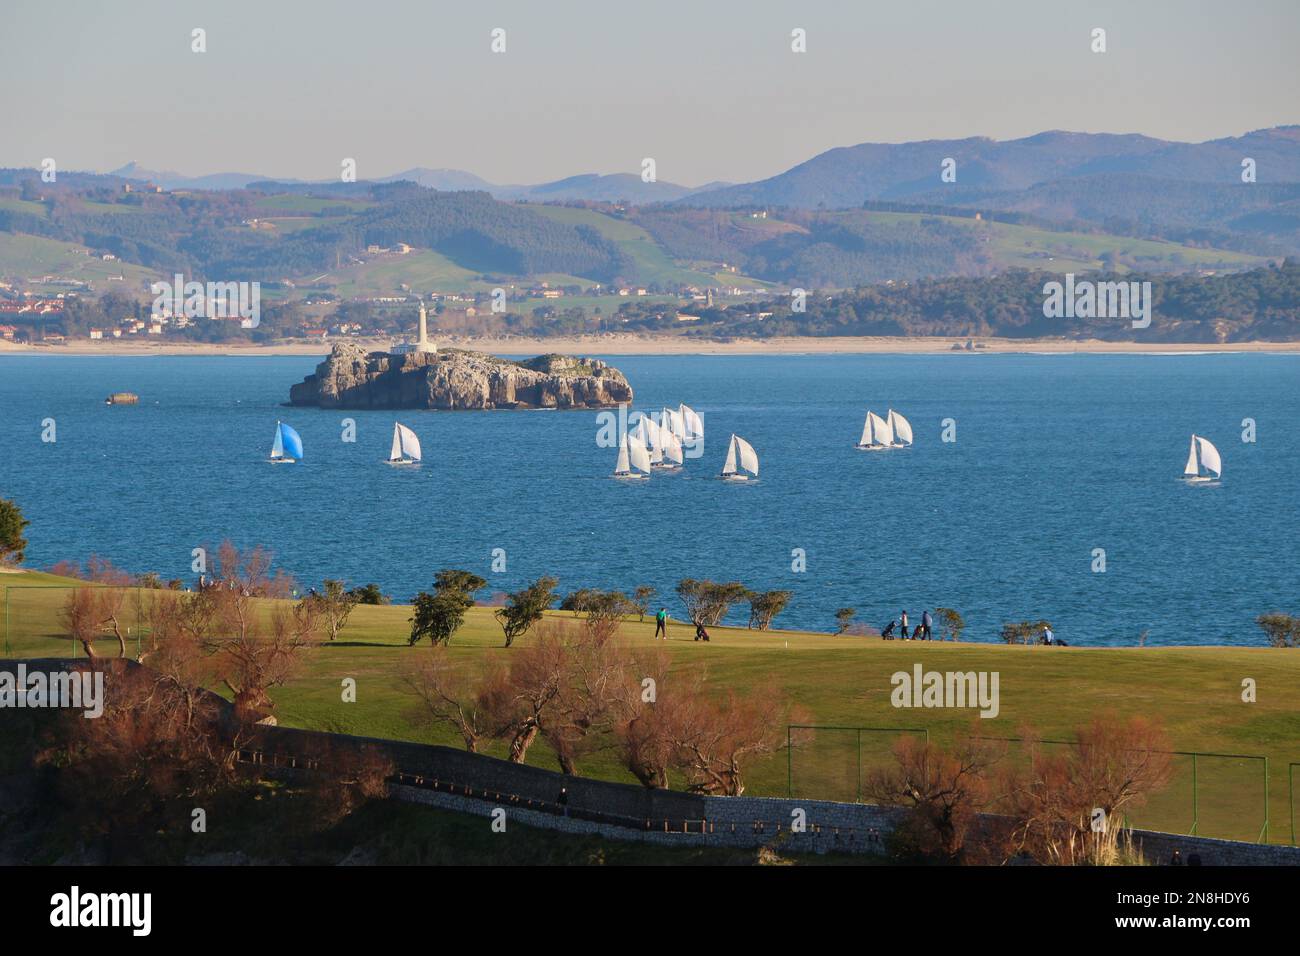 Landscape view across Matalenas Golf Course with a sailing competition underway and the Mouro Island and lighthouse Santander Cantabria Spain Stock Photo